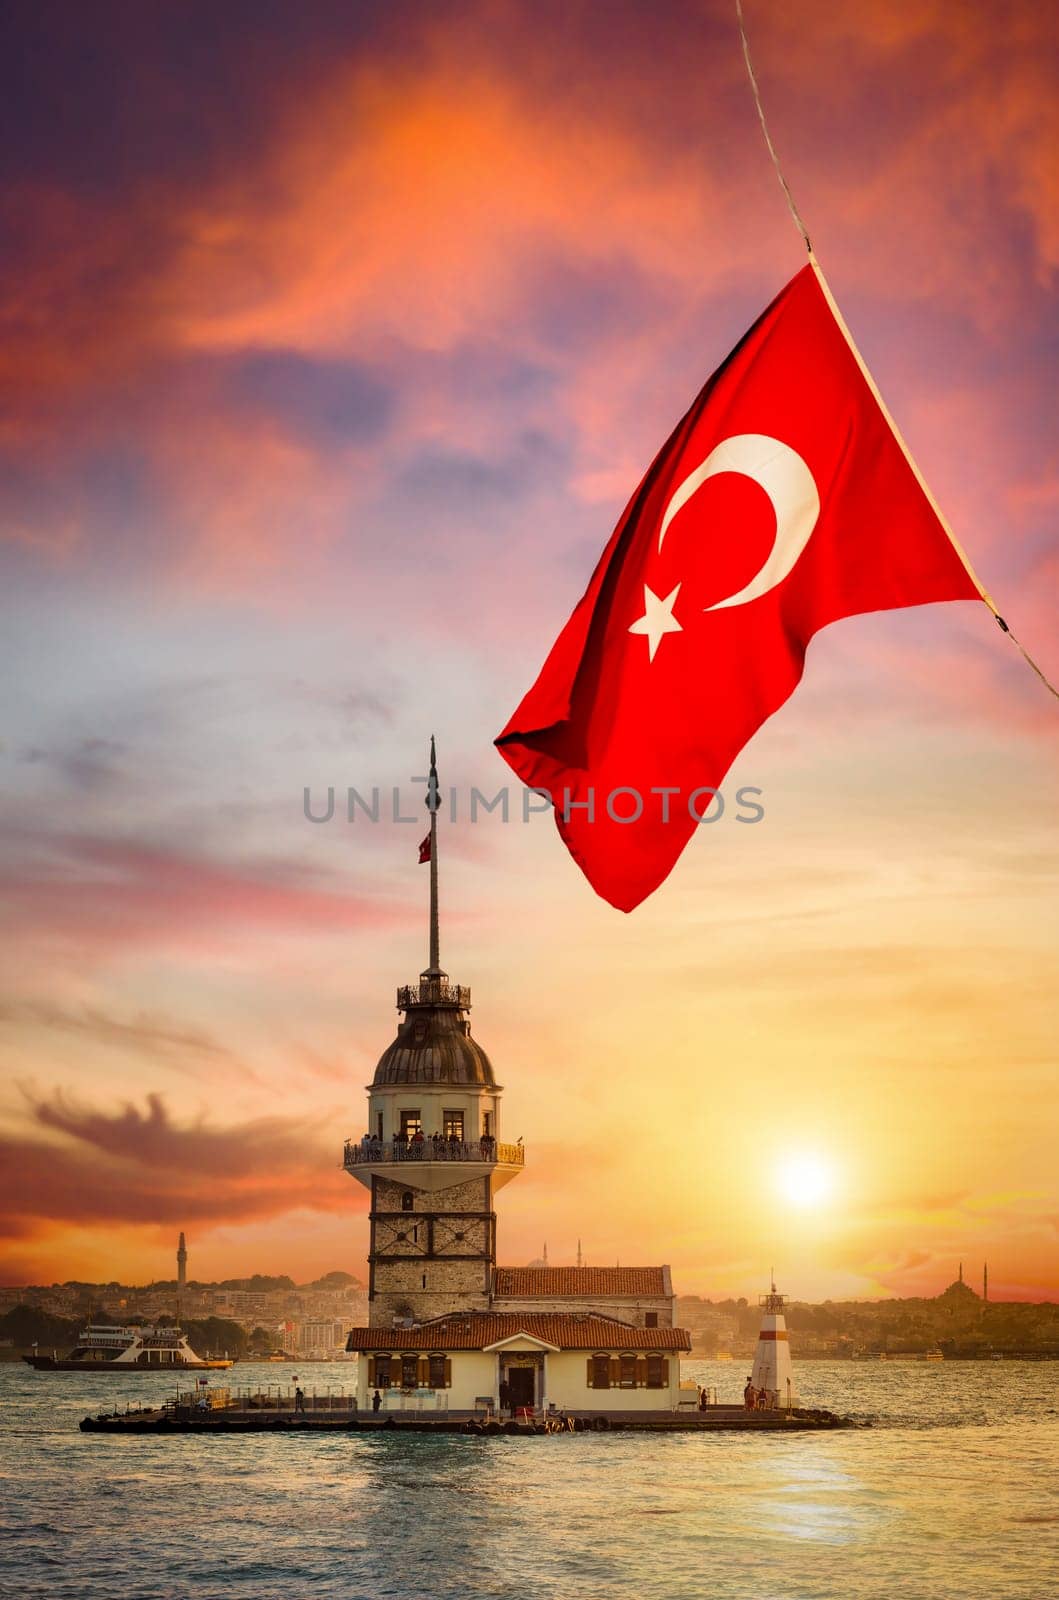 Turkish flag over the maiden tower in Istanbul